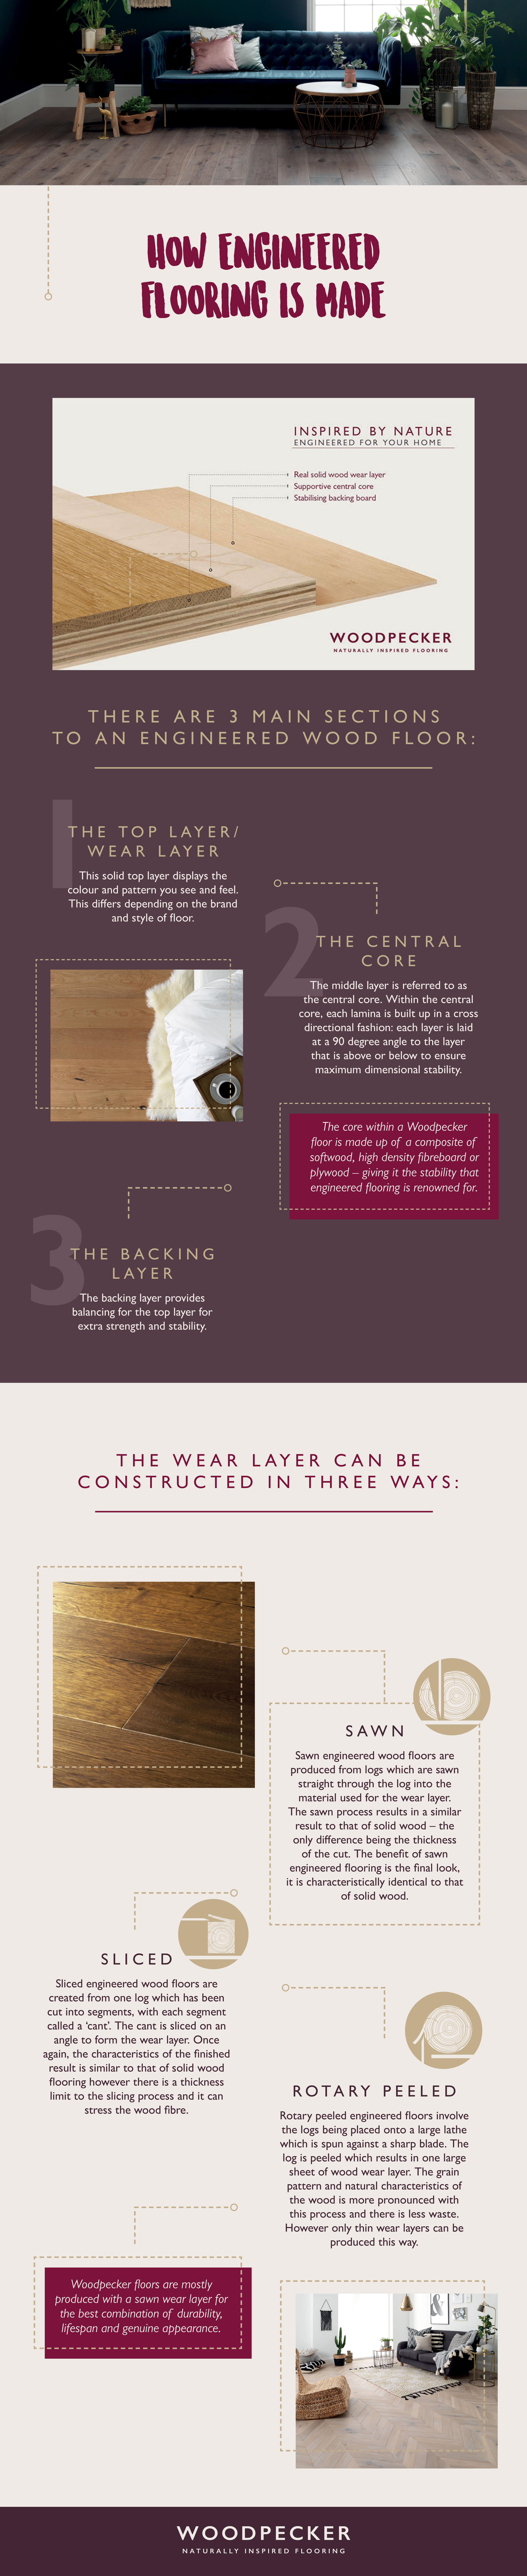 A Visual Guide On How Engineered Flooring Is Made | Woodpecker Flooring ...